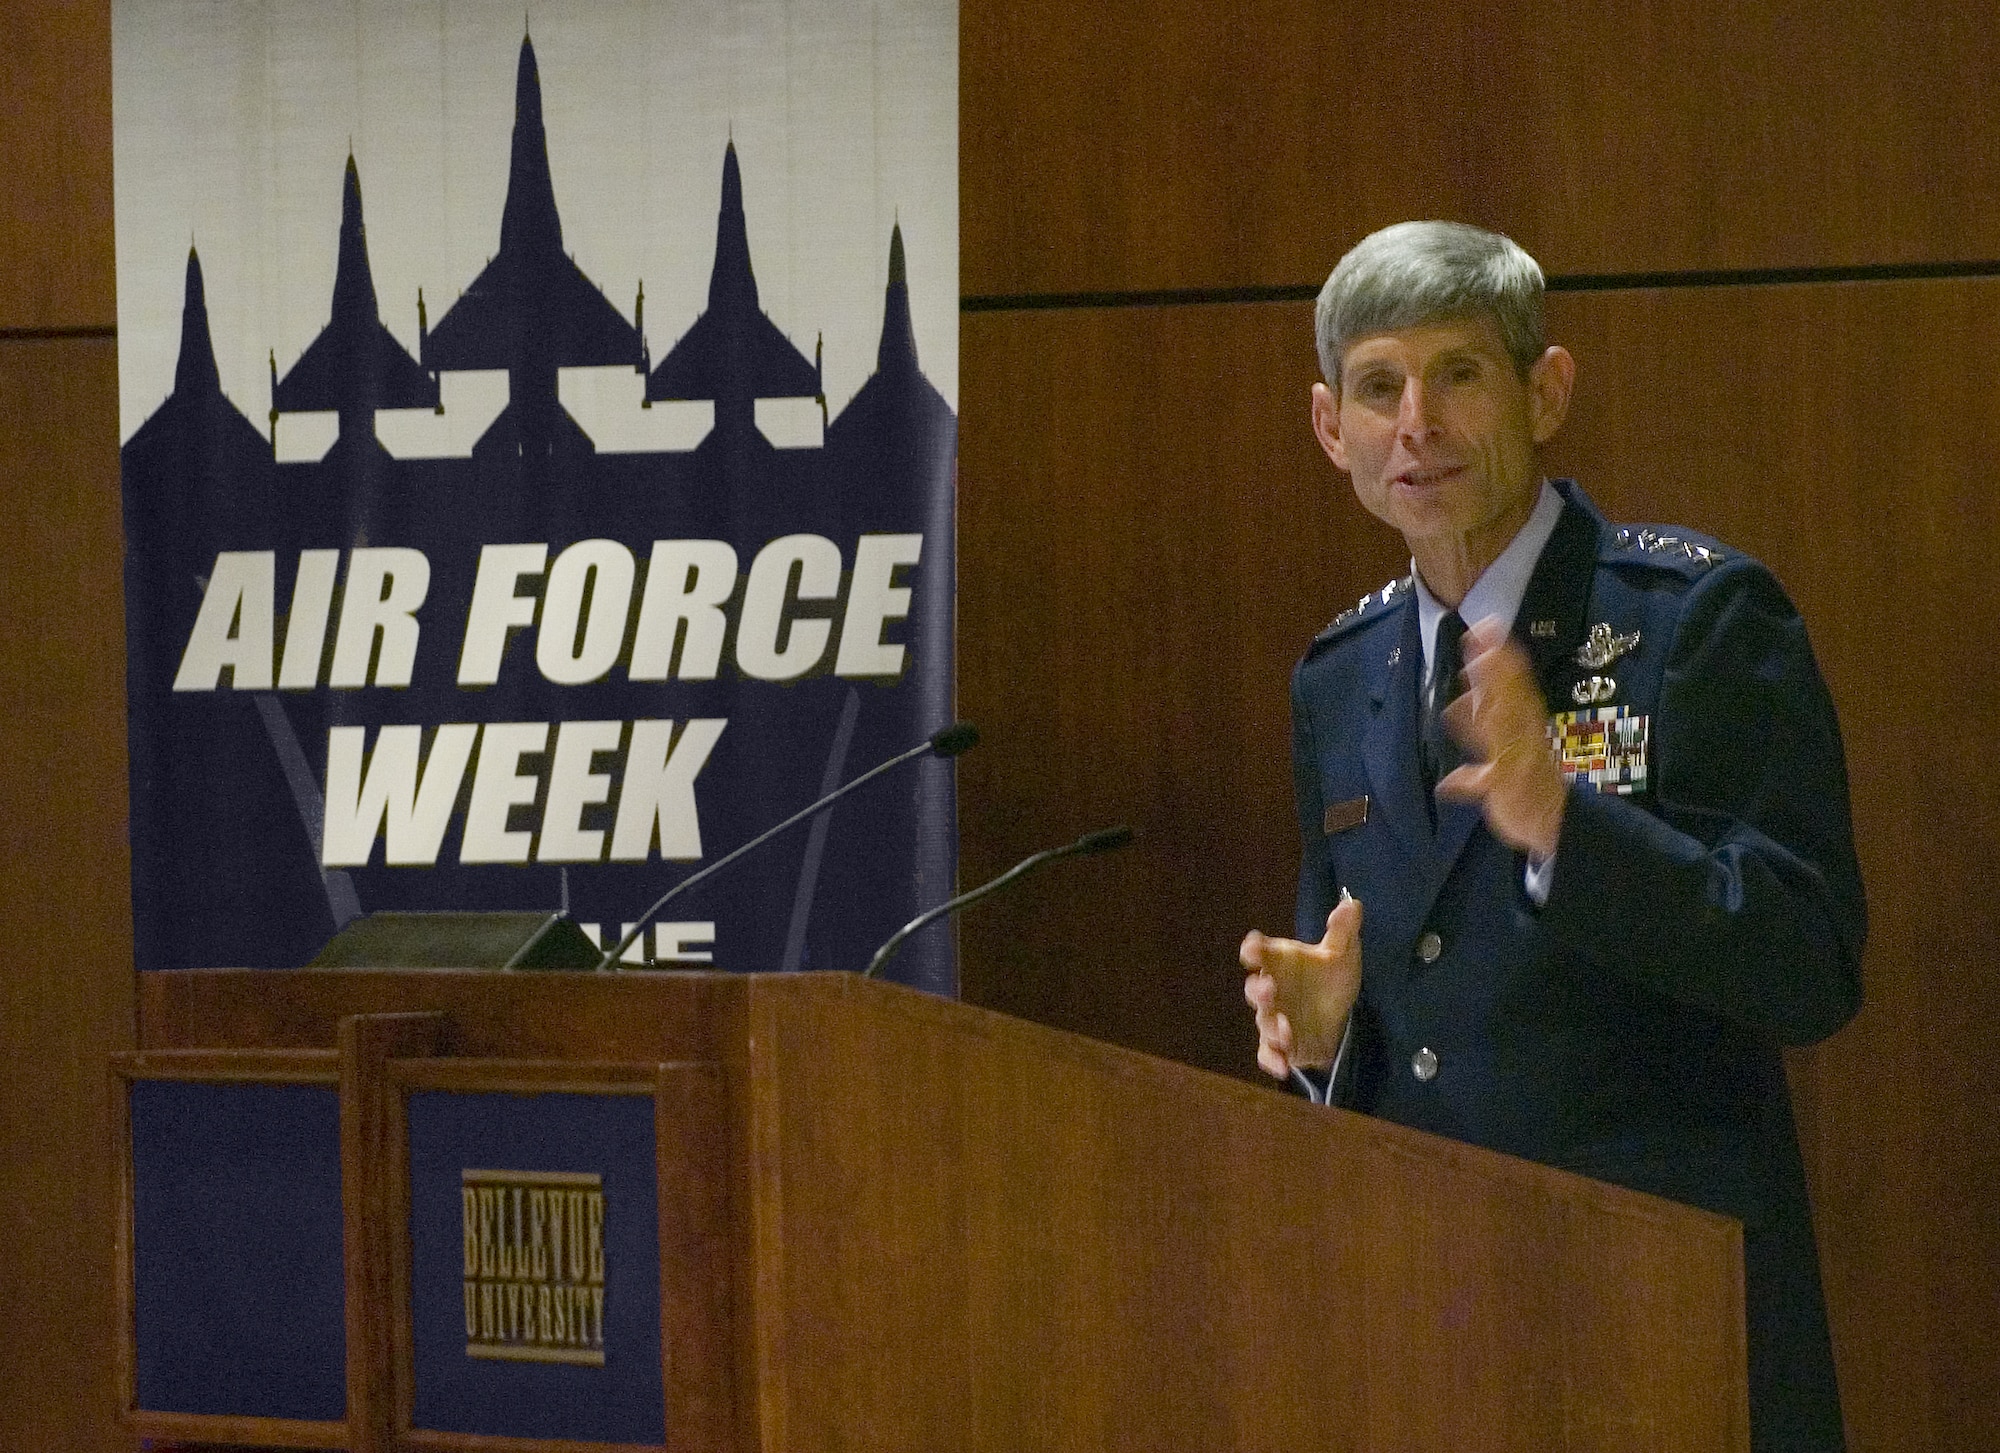 Gen. Norton A. Schwartz was the keynote speaker at the Global Leadership Forum held Aug. 15 at Bellevue University in Nebraska during Air Force Week in the Heartland. General Schwartz is the Air Force chief of staff. (U.S. Air Force photo/Lance Cheung)